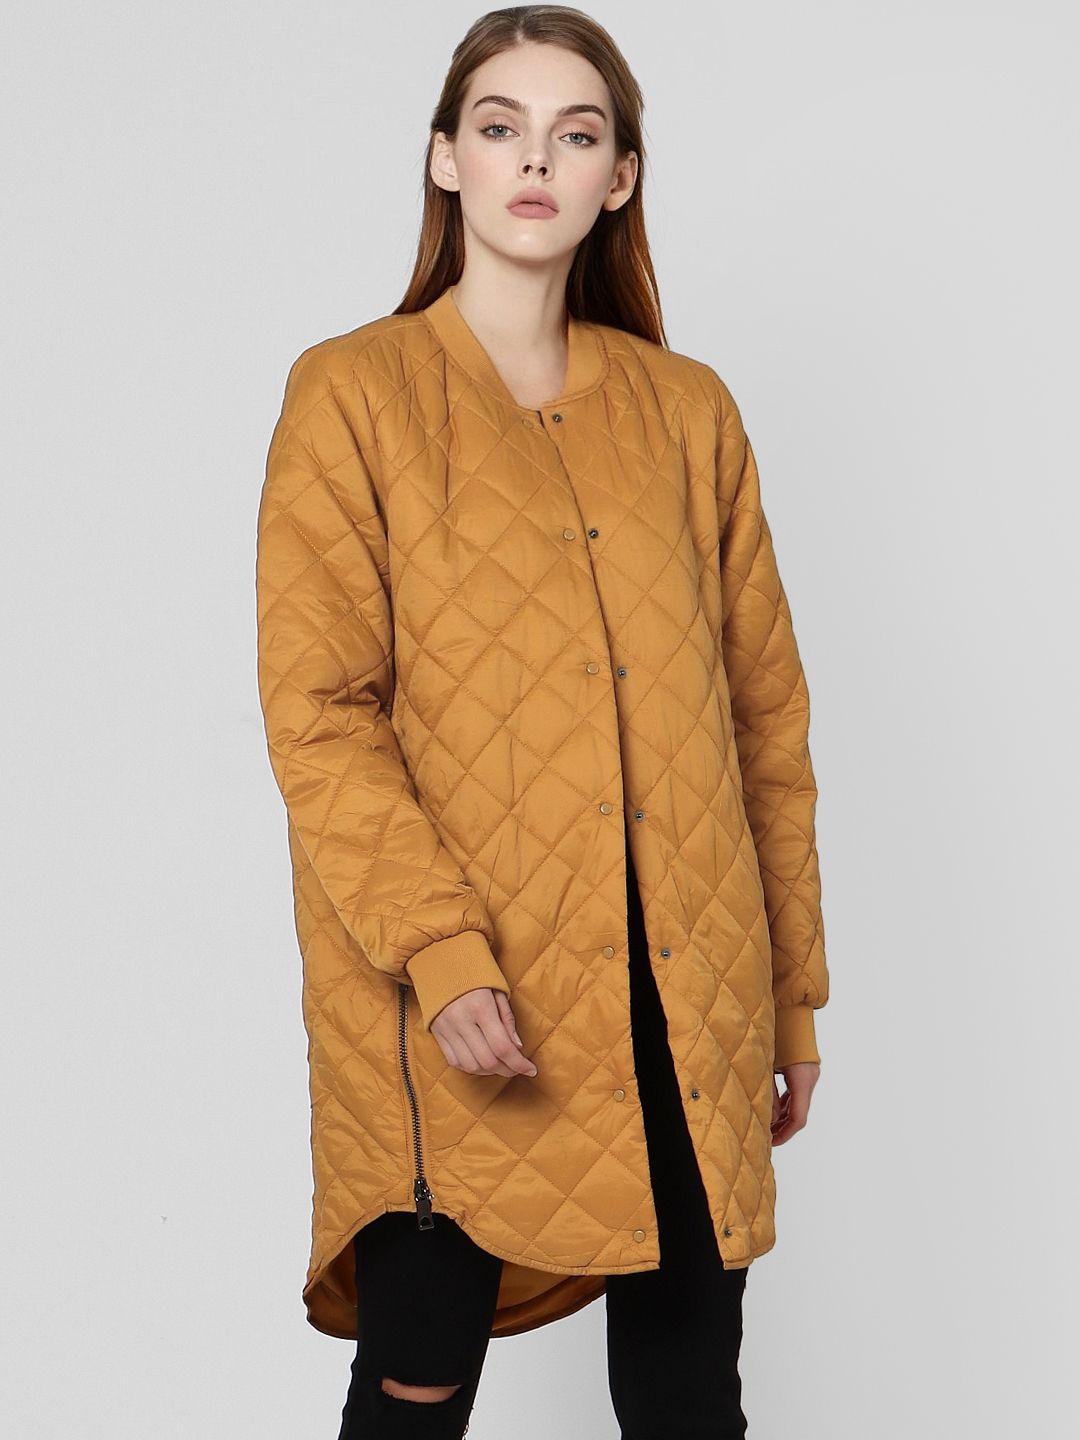 Vero Moda Women Mustard Yellow Solid Longline Quilted Jacket Price in India